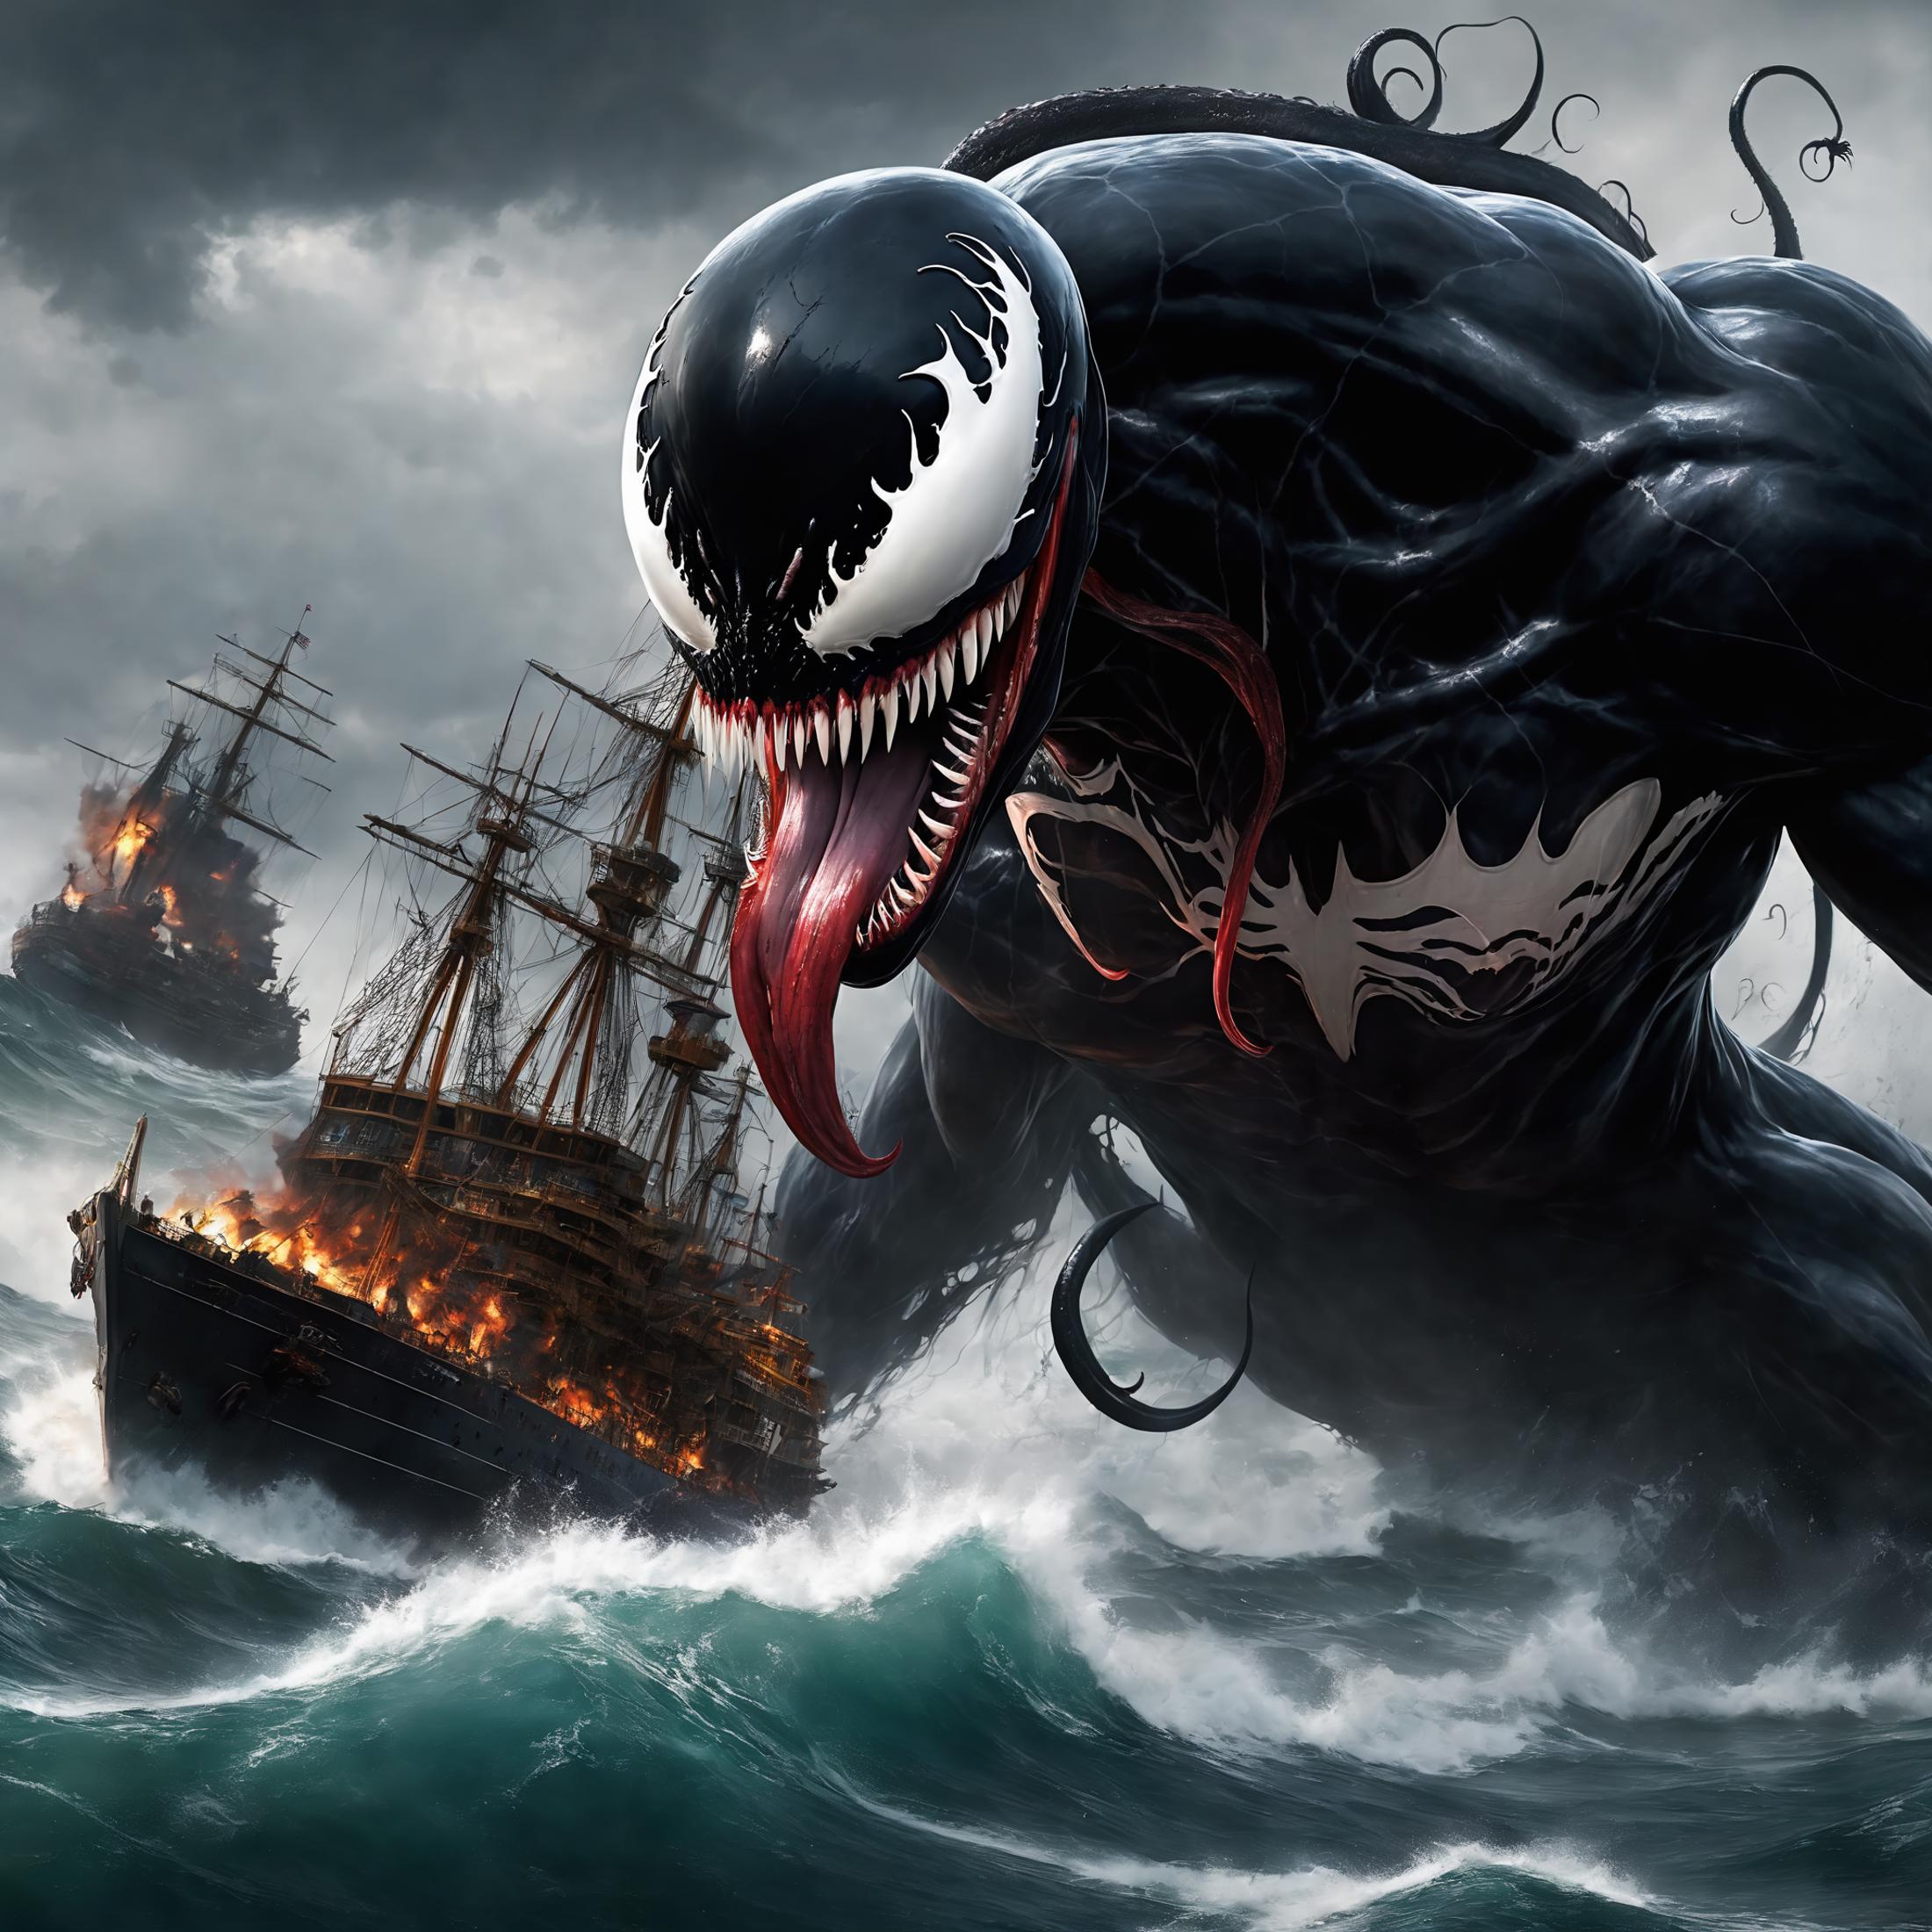 A Venomous Scene: Venom the Symbiote Takes Over the Ocean with His Mouth Open and a Pirate Ship in the Background